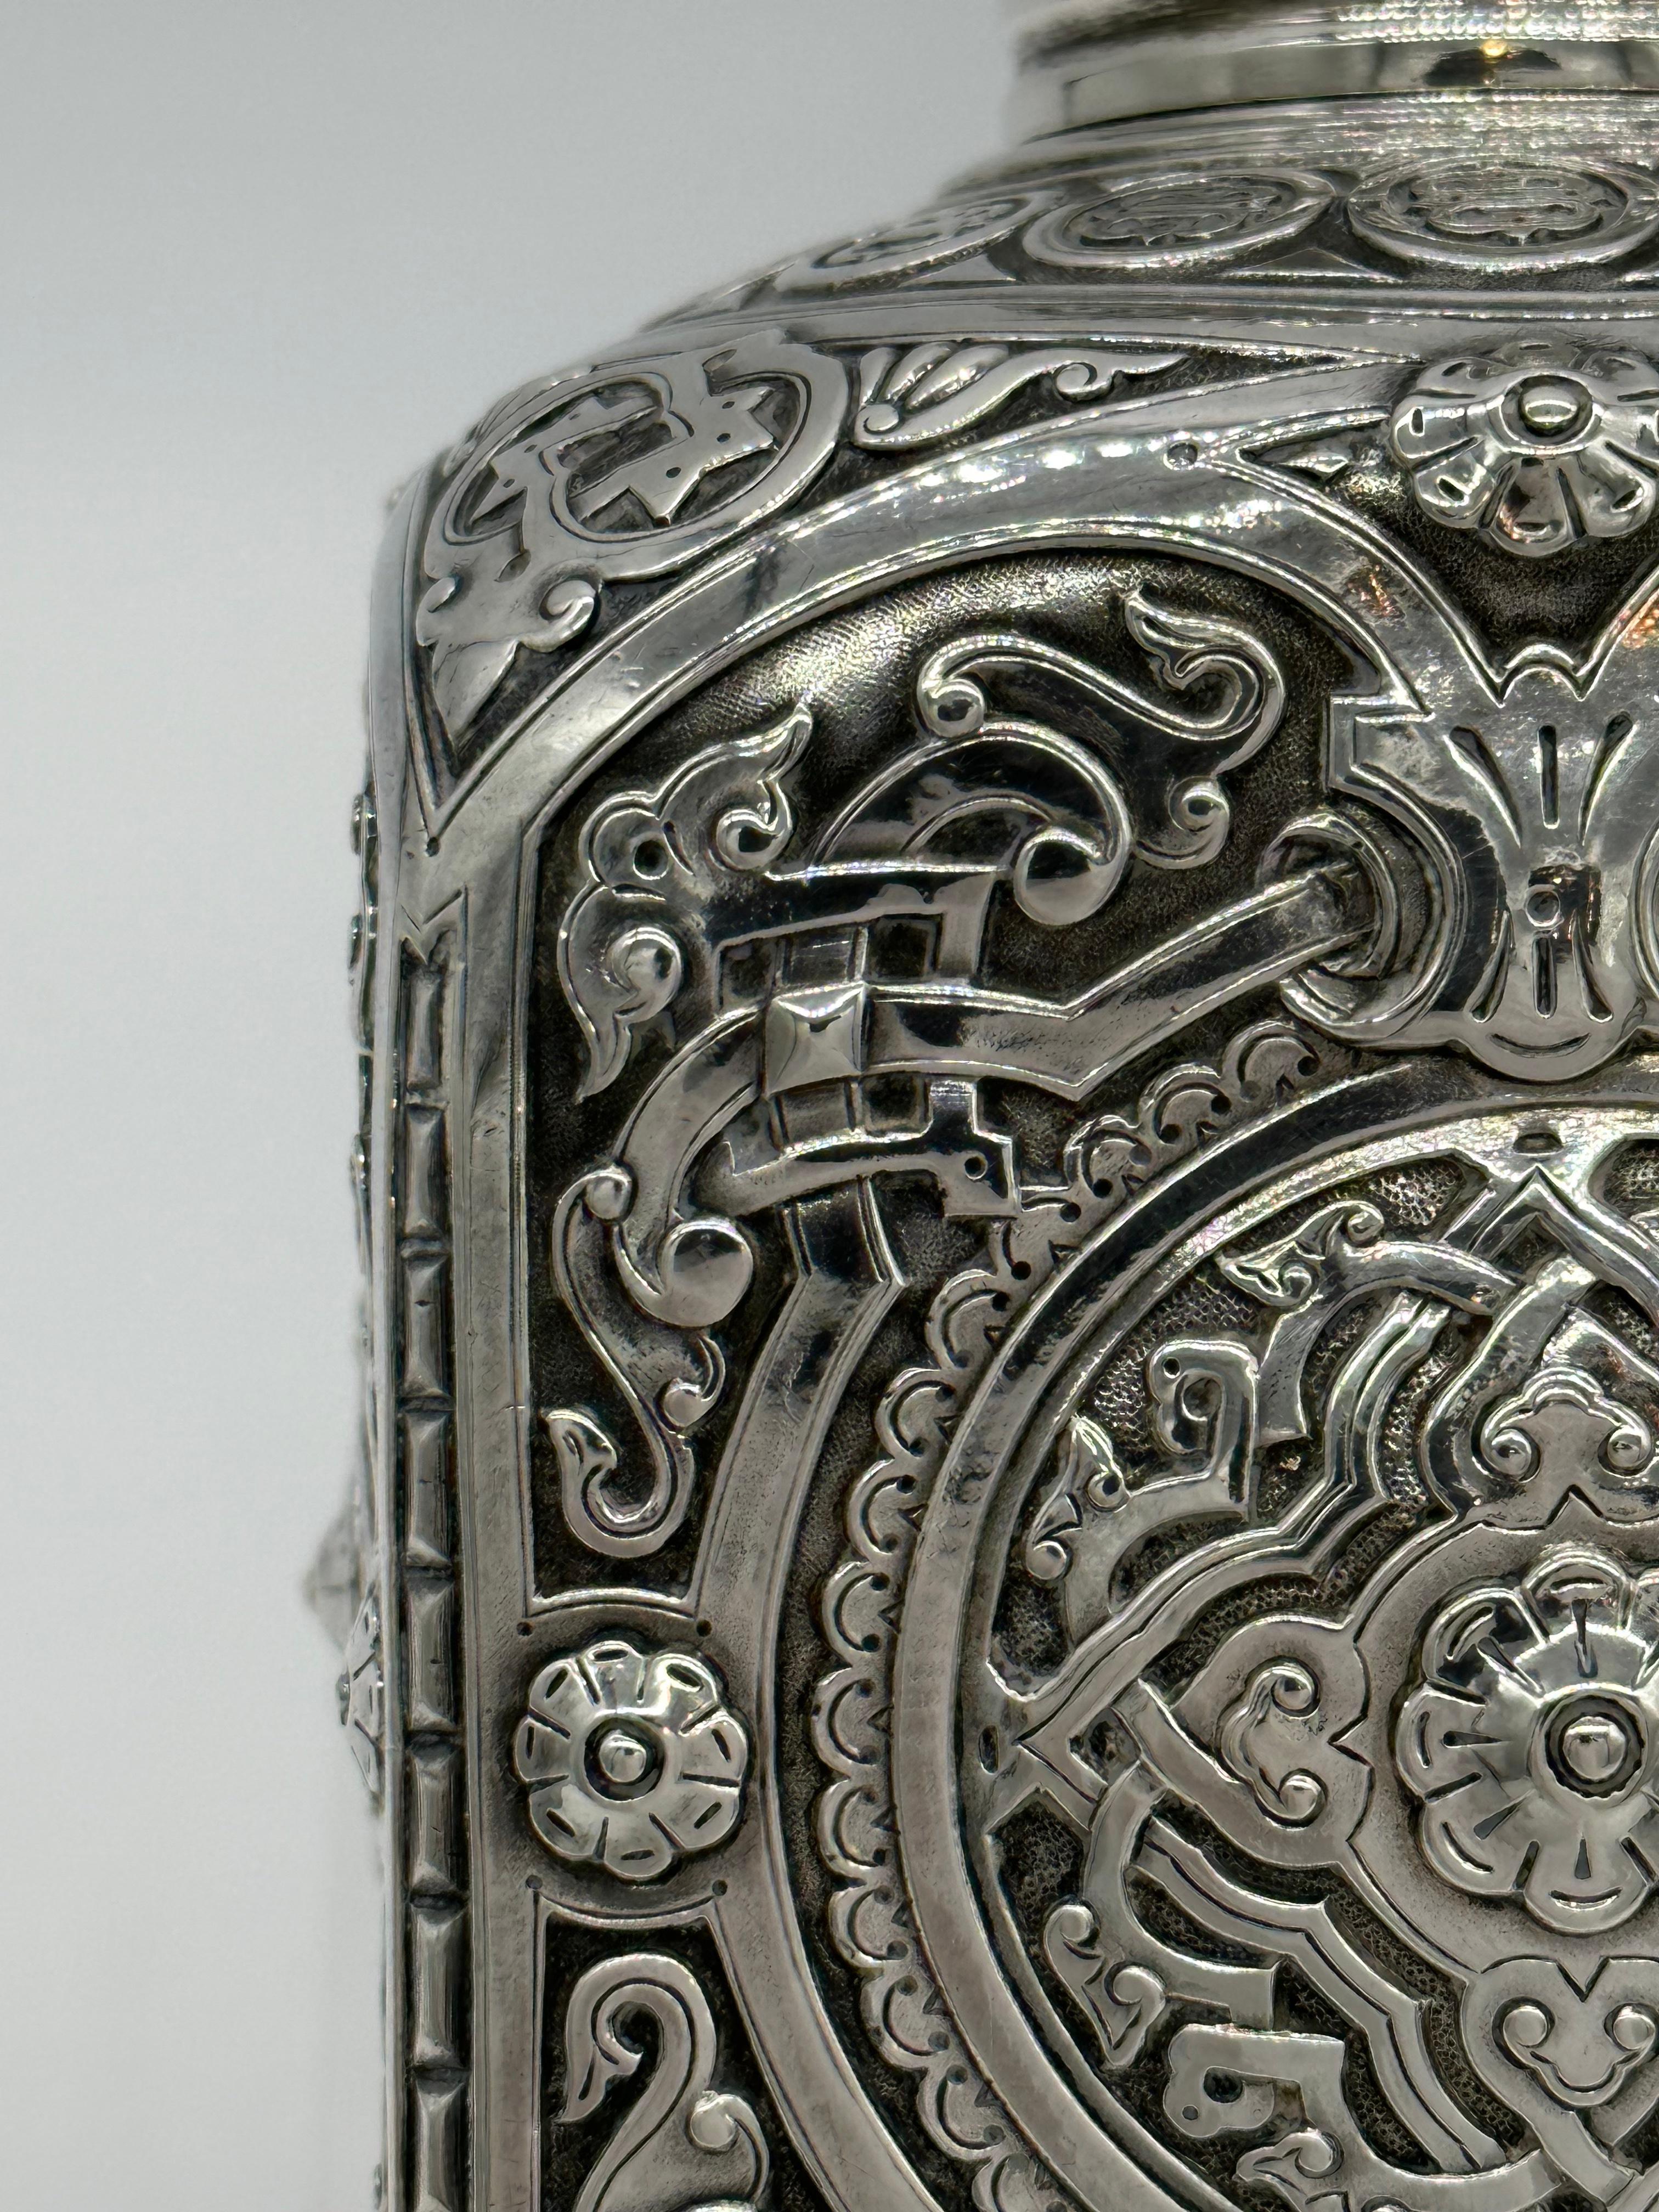 Amazing Antique Russian Imperial Silver Tea Caddy, Loskutov, Moscow 1889 4